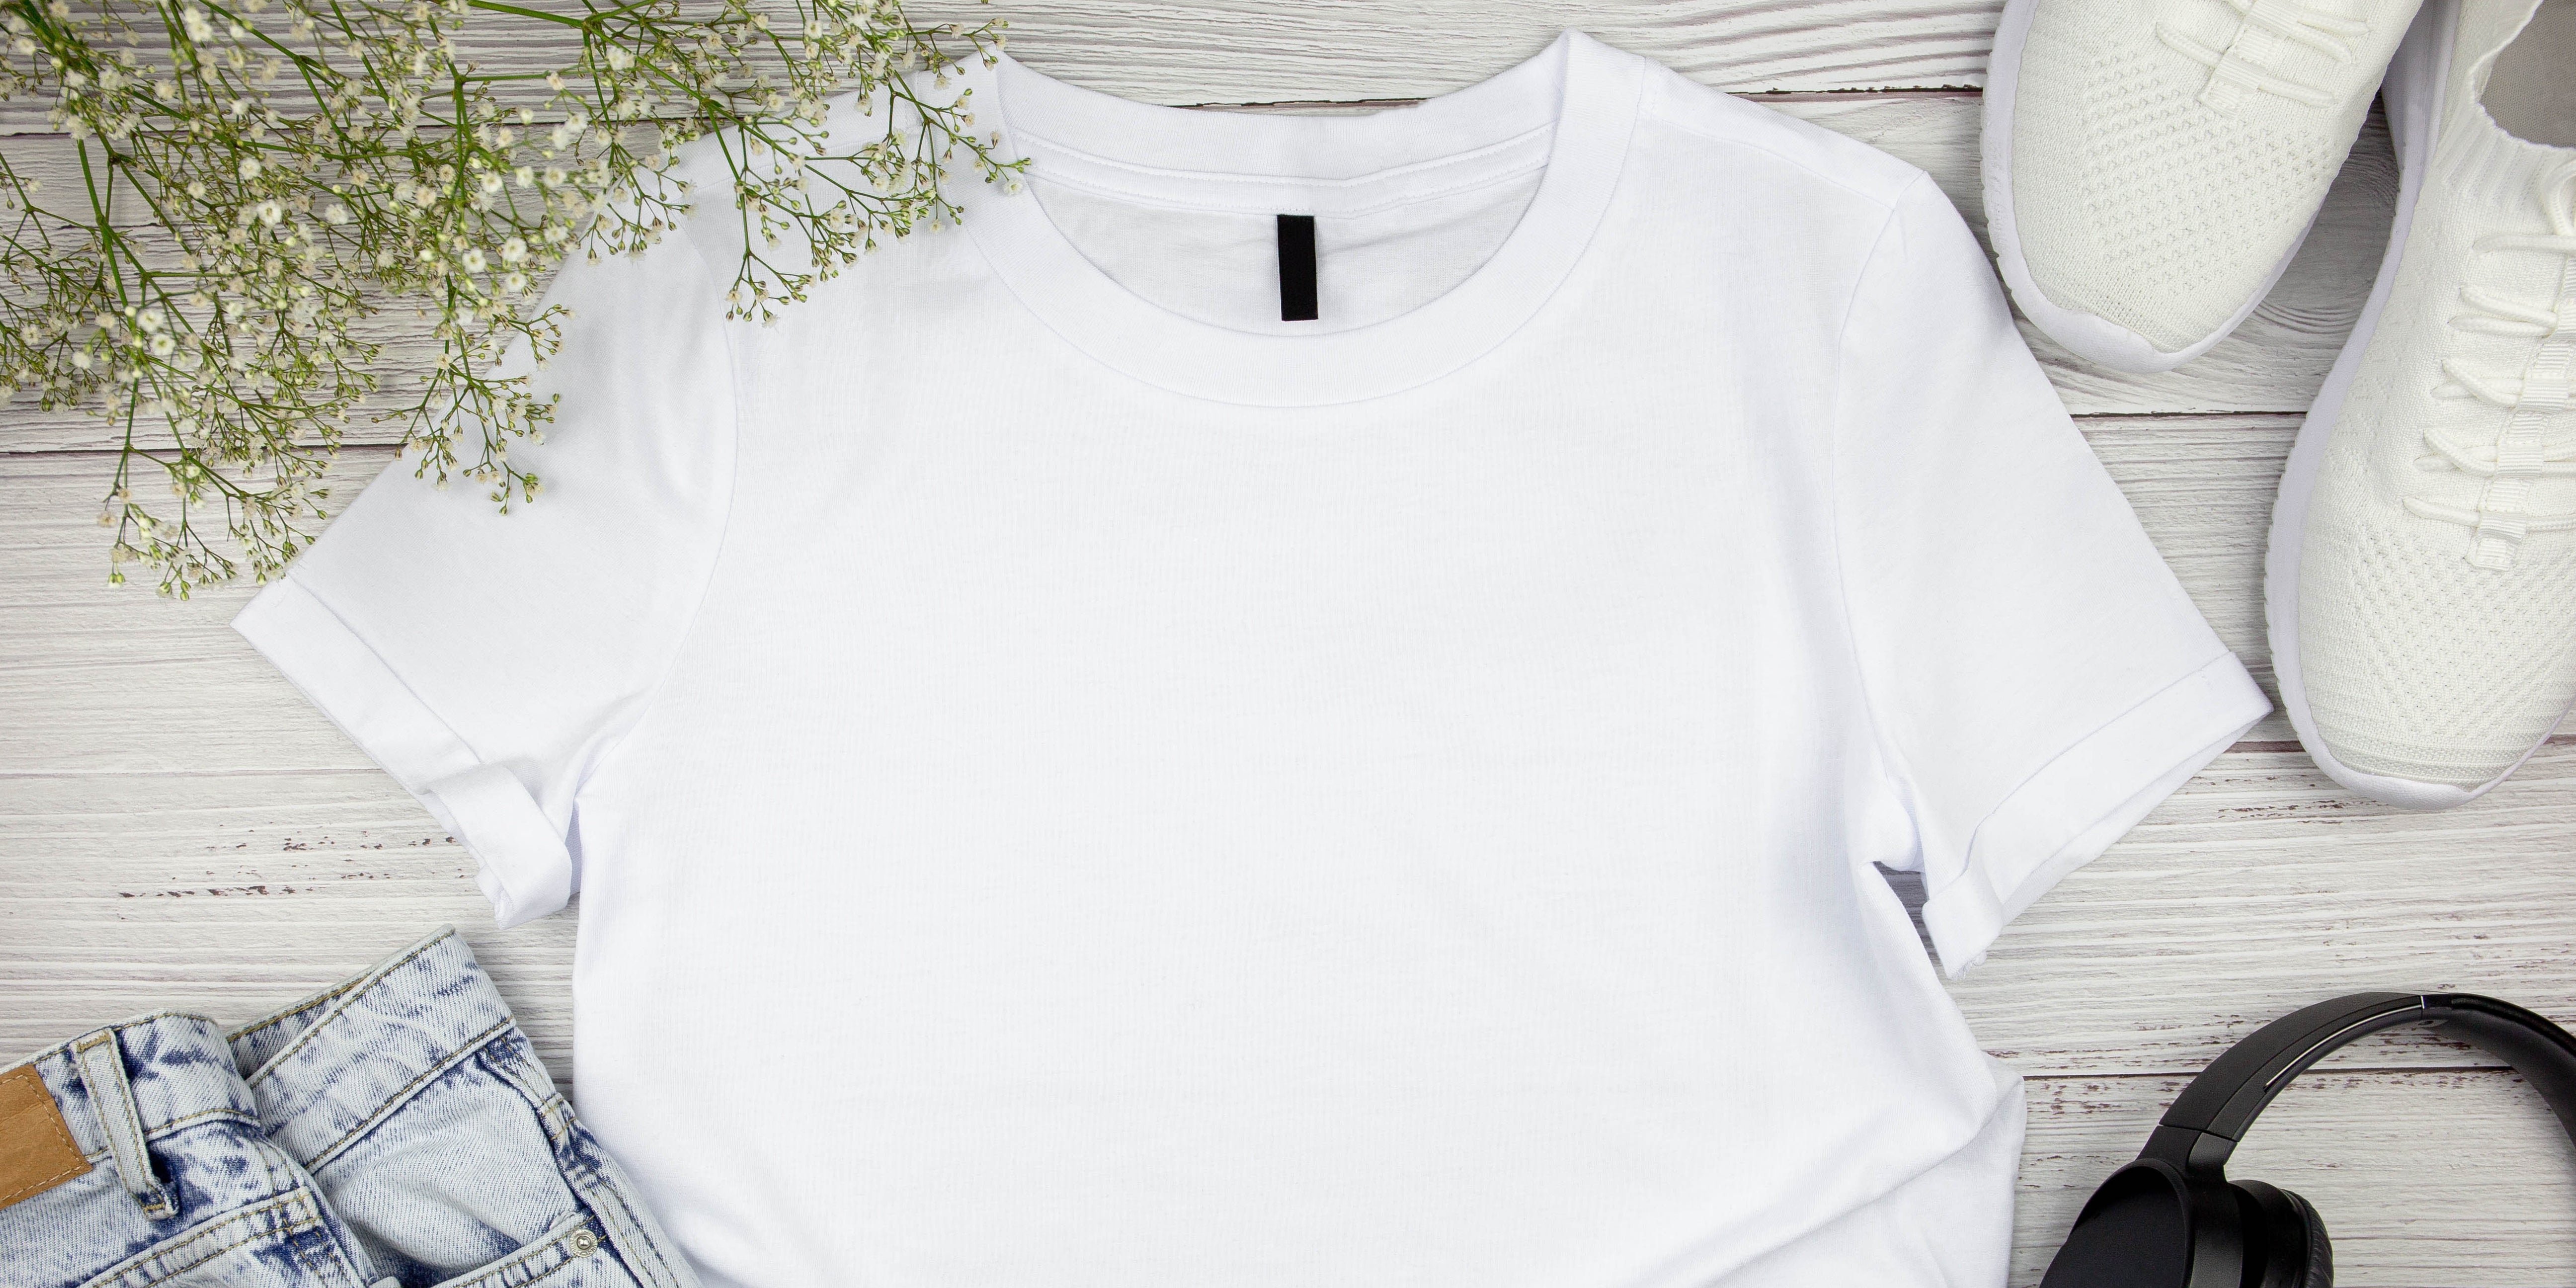 The Environmental Impact of Hemp Clothing: Why It Matters